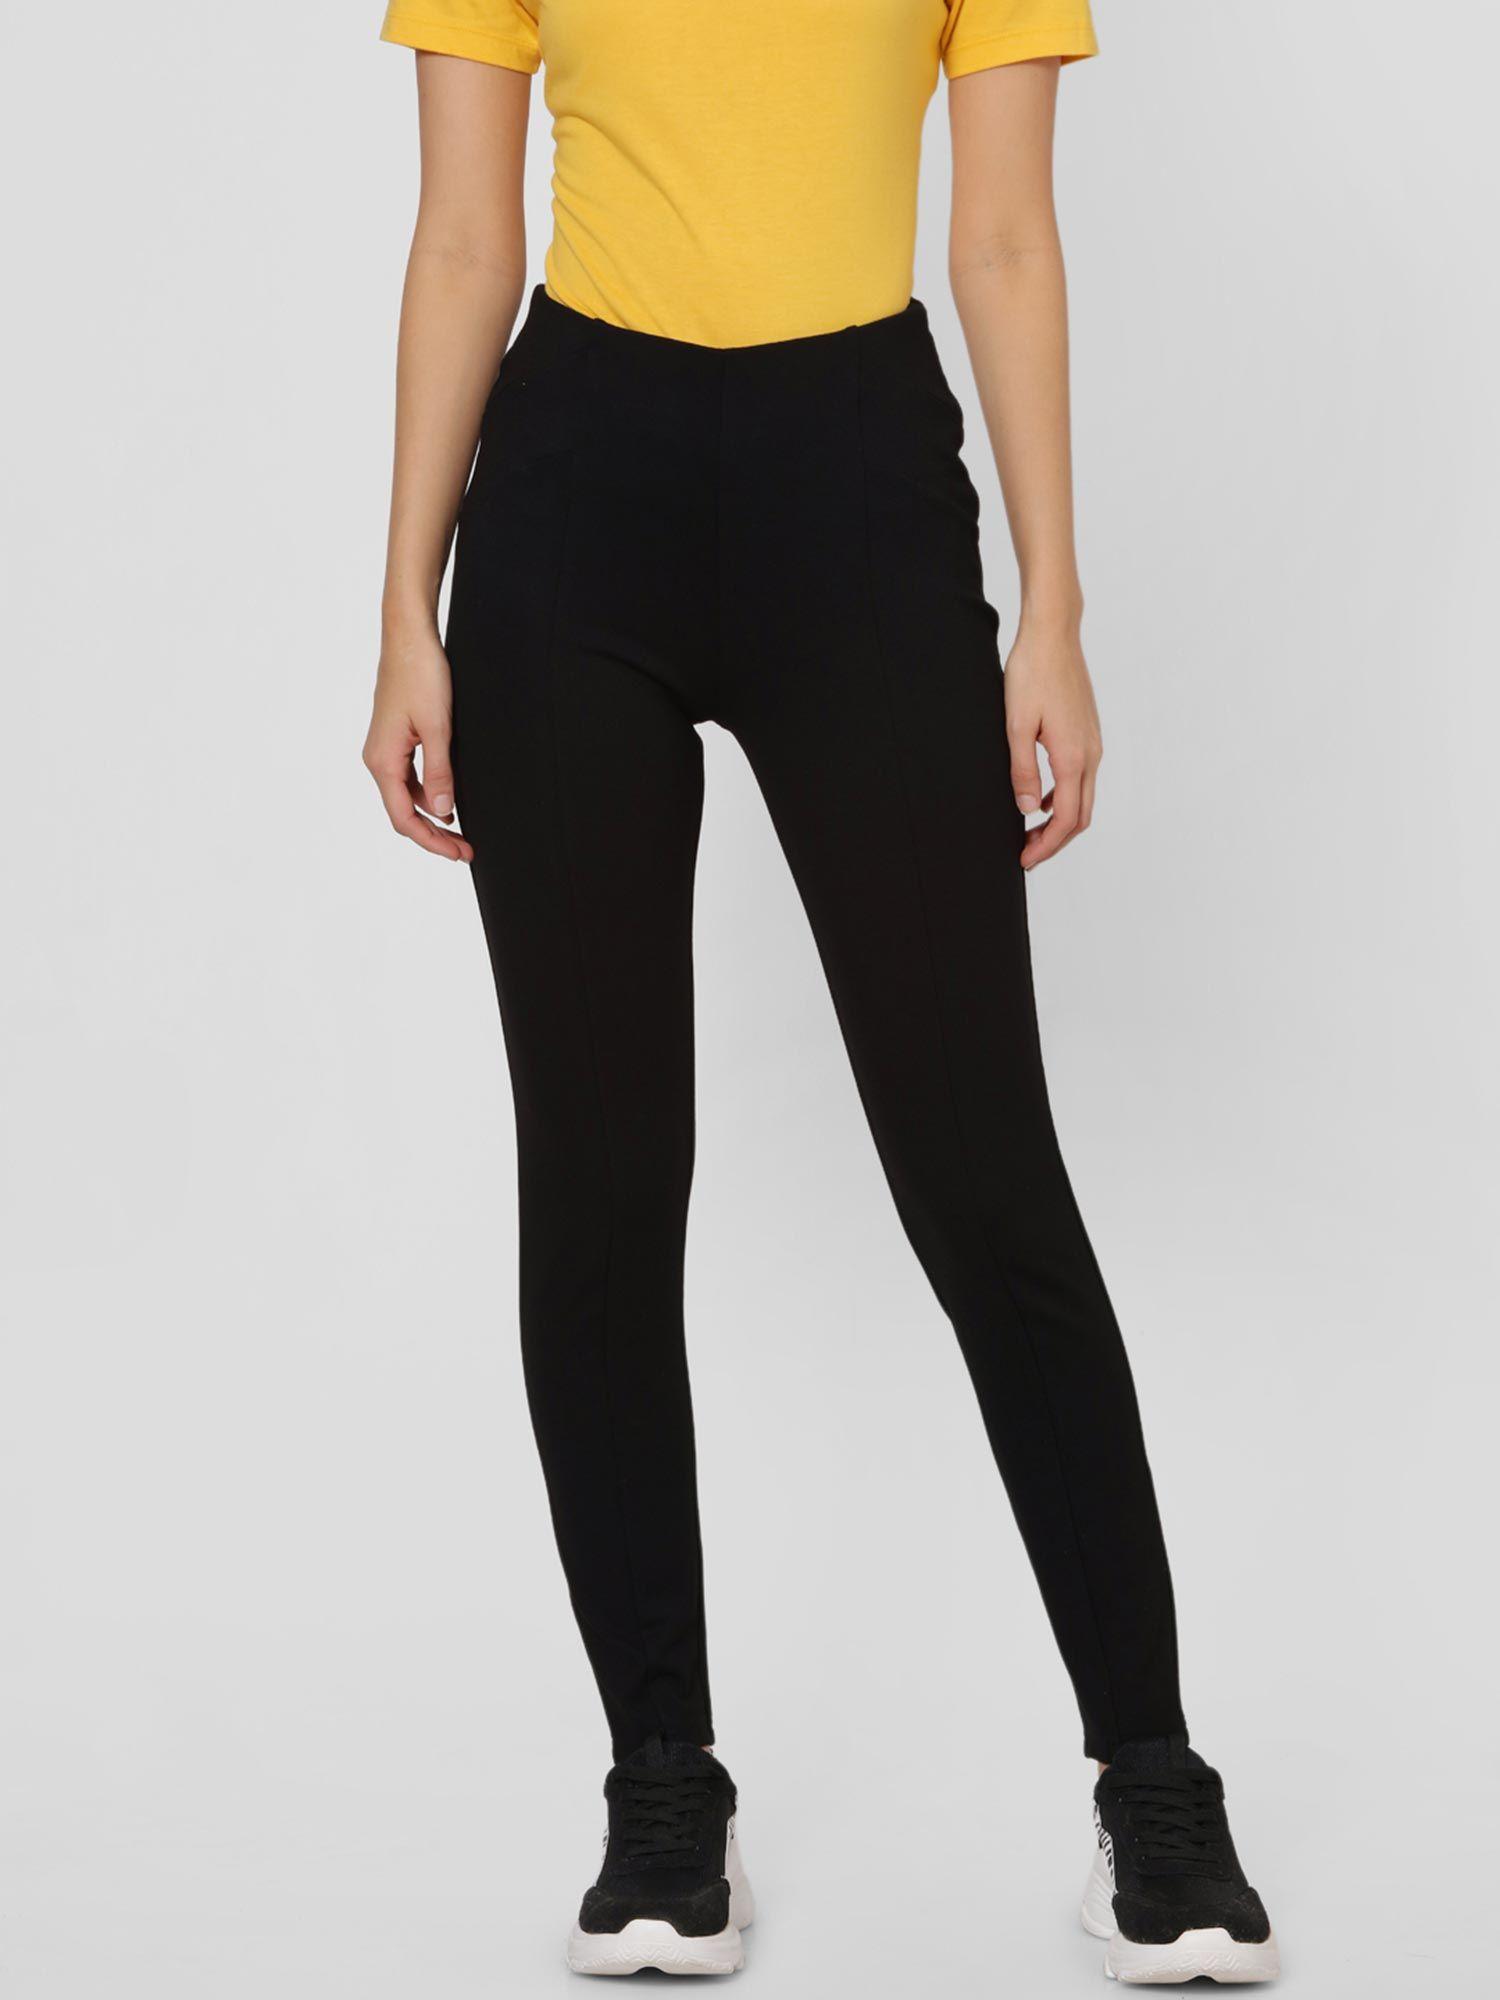 women black solid casual jeggings